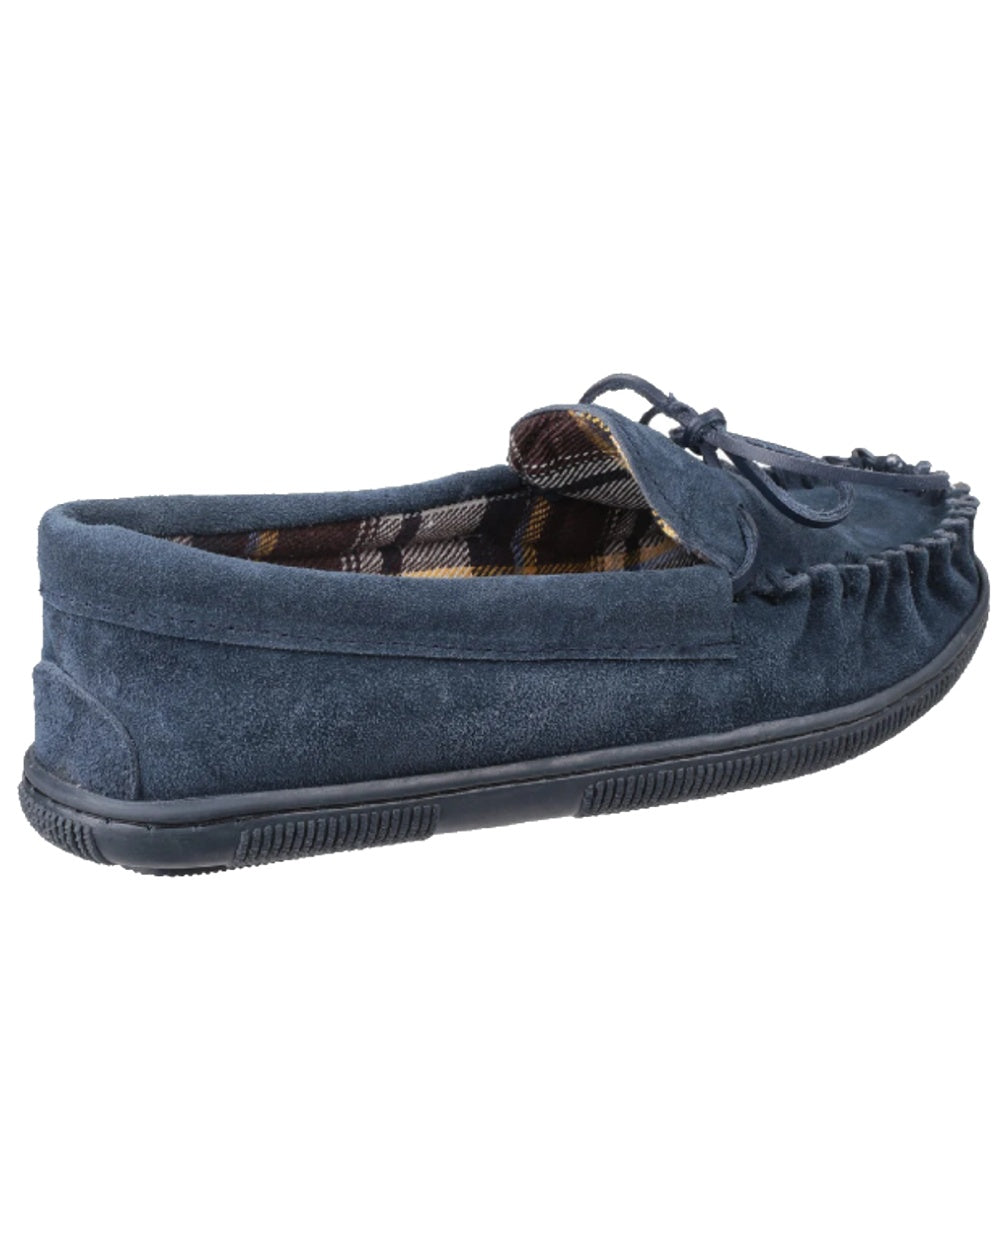 Cotswold Alberta Moccasin Slippers in Navy 